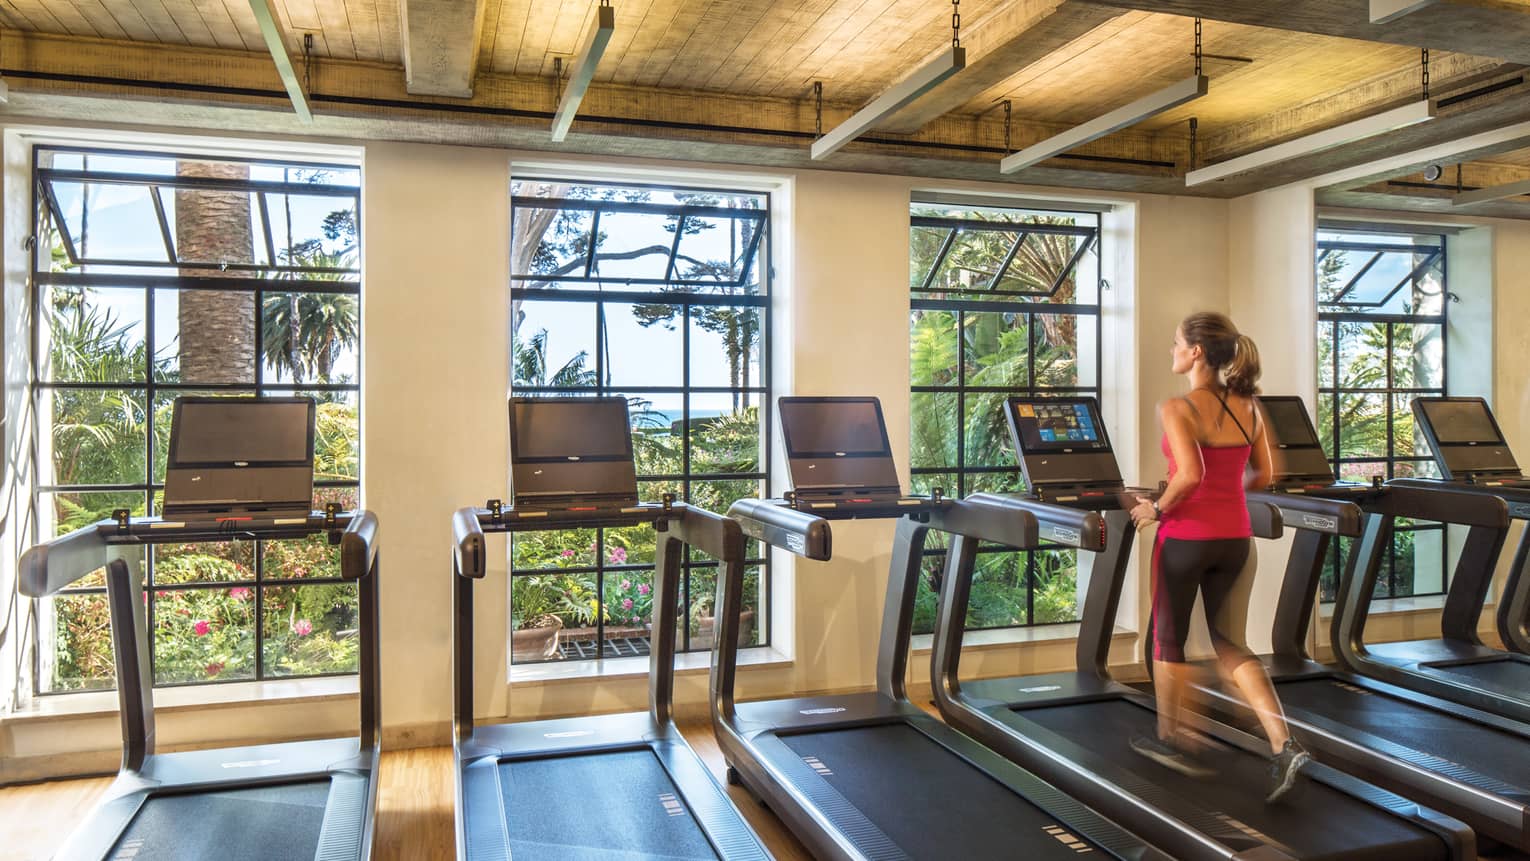 Woman runs on row treadmill in row of machines by large open windows in Fitness Centre